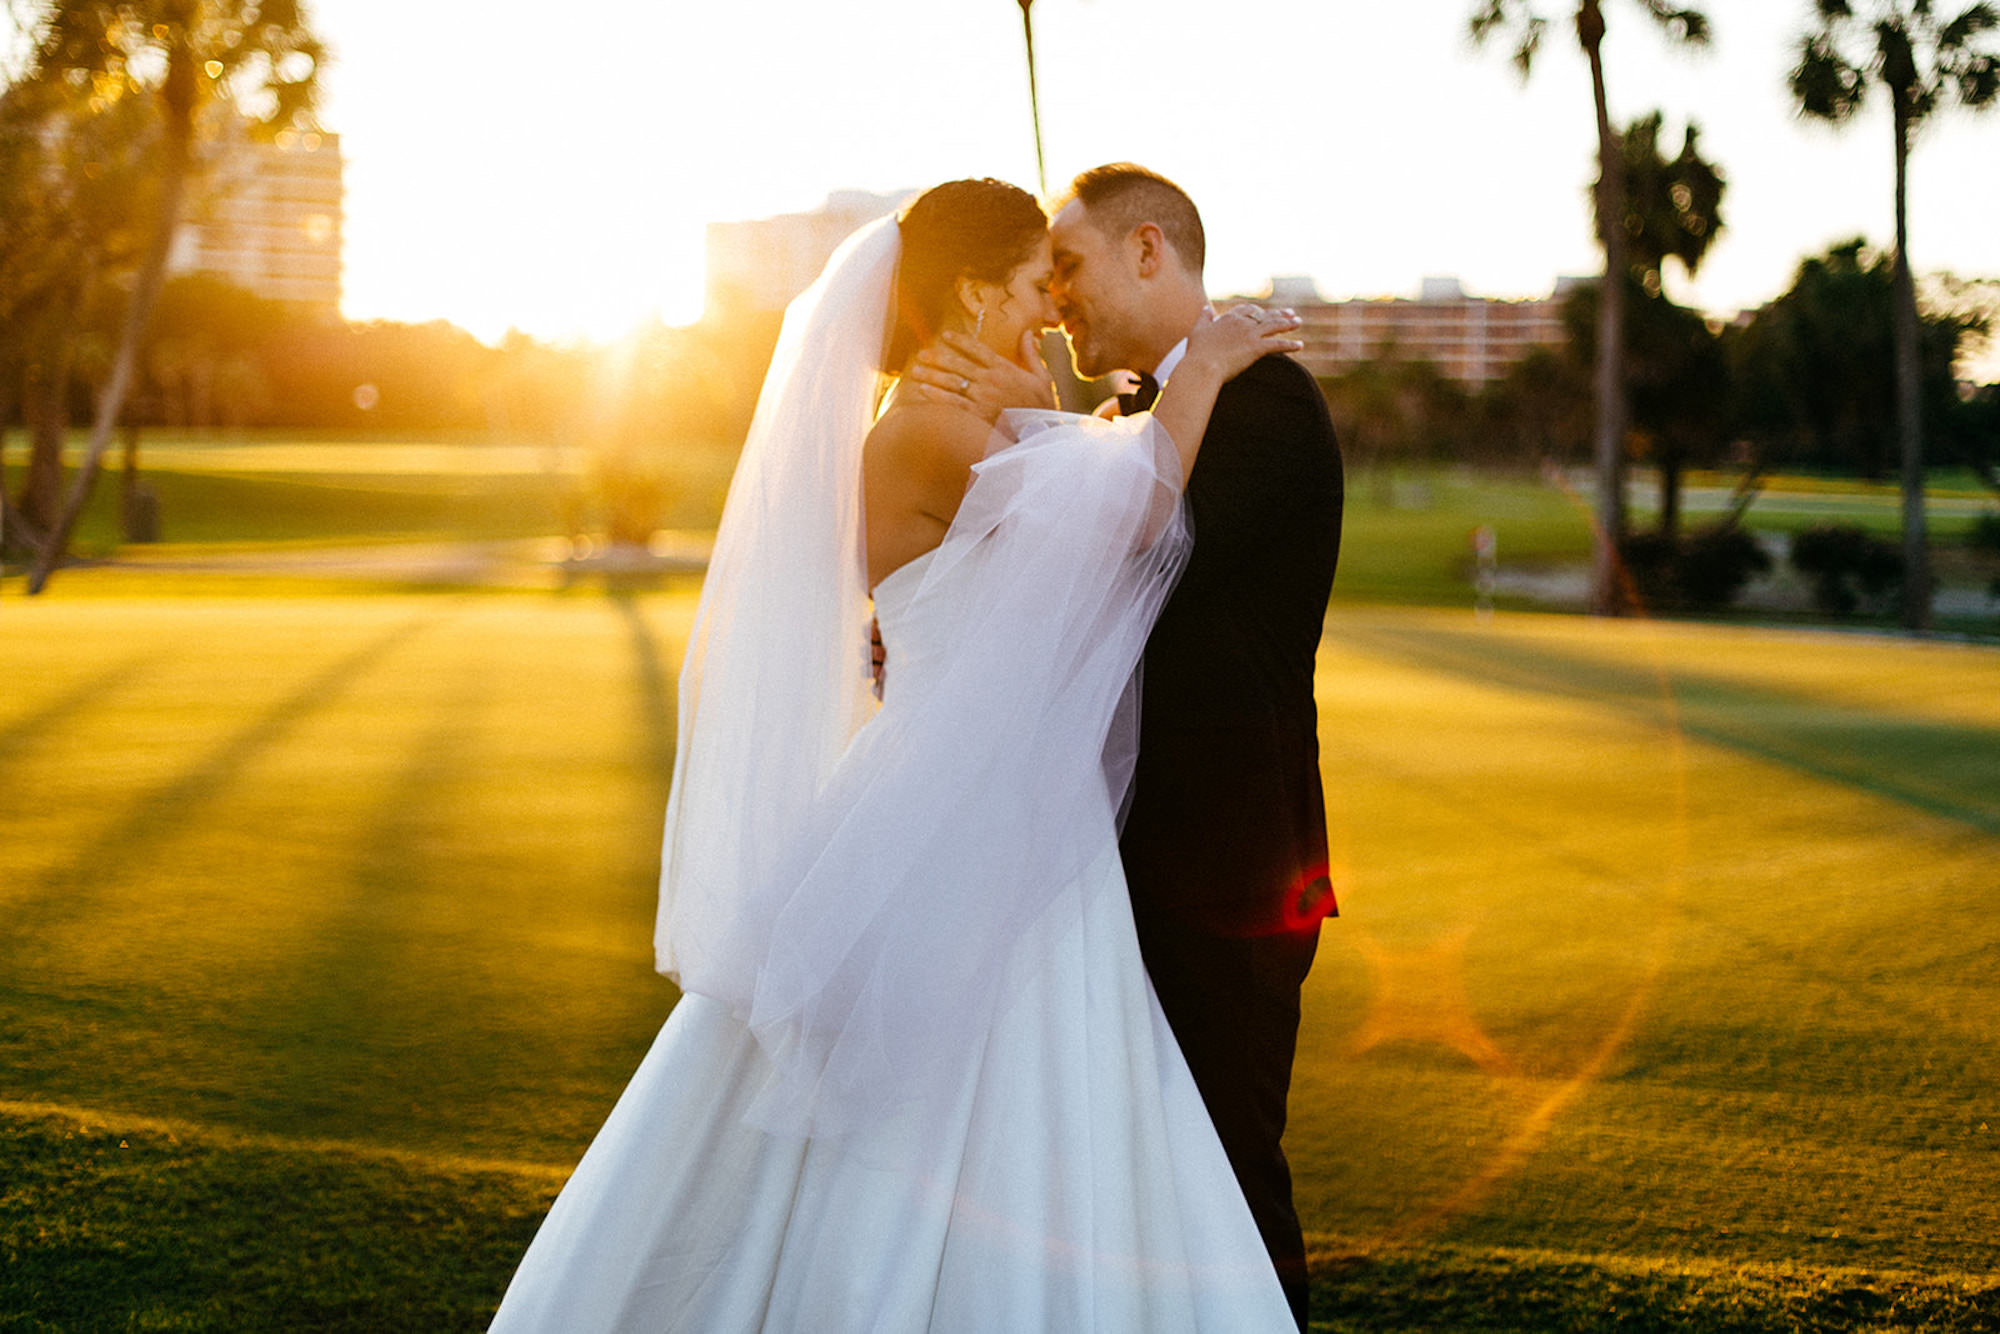 Romantic Sunset Bride and Groom Wedding Portrait on Golf Course | Tampa Bay Wedding Venue The Resort at Longboat Key Club